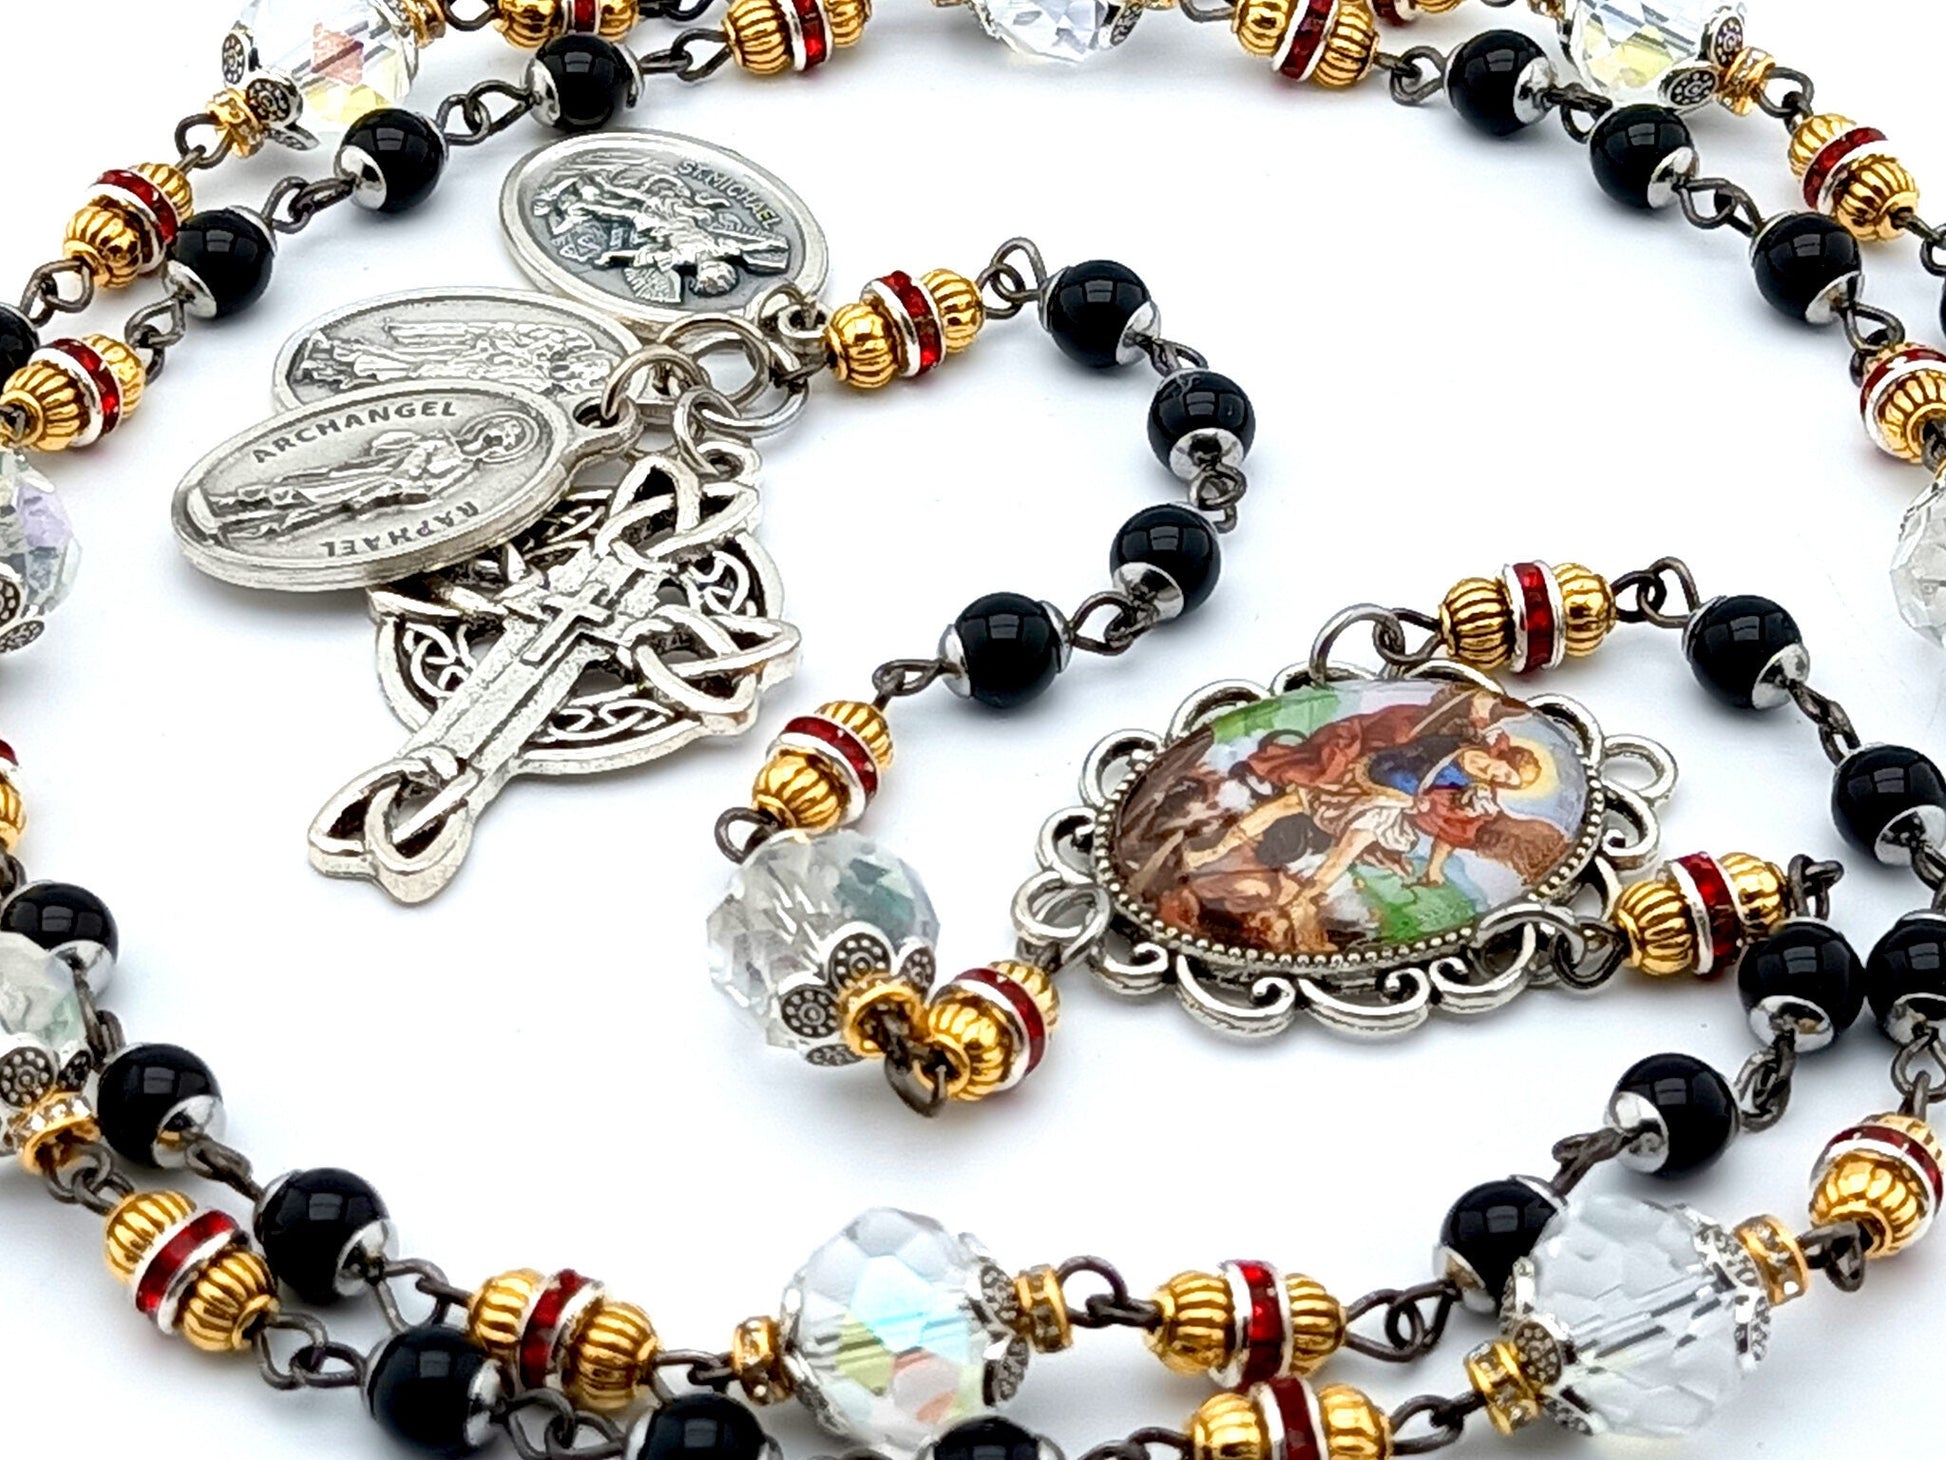 Saint Michael unique rosary beads prayer chaplet with black and clear glass beads, silver angel medals and picture centre medal and crucifix.